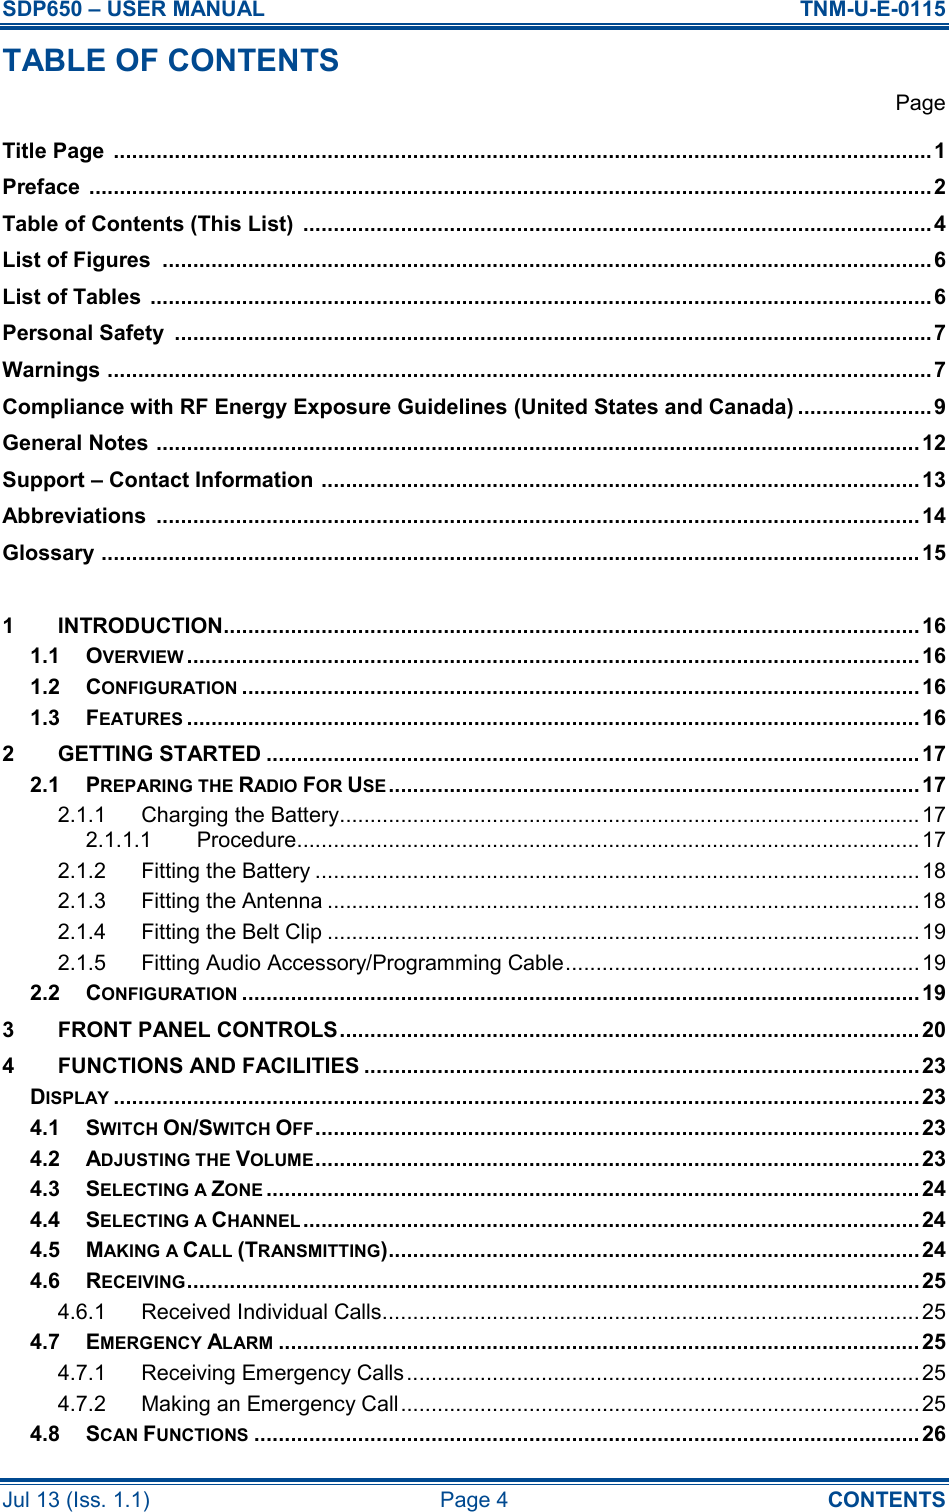 SDP650 – USER MANUAL  TNM-U-E-0115 Jul 13 (Iss. 1.1)  Page 4  CONTENTS TABLE OF CONTENTS   Page Title Page  ......................................................................................................................................1 Preface  .......................................................................................................................................... 2 Table of Contents (This List)  ....................................................................................................... 4 List of Figures  ..............................................................................................................................6 List of Tables  ................................................................................................................................ 6 Personal Safety  ............................................................................................................................7 Warnings ....................................................................................................................................... 7 Compliance with RF Energy Exposure Guidelines (United States and Canada) ......................9 General Notes ............................................................................................................................. 12 Support – Contact Information .................................................................................................. 13 Abbreviations  .............................................................................................................................14 Glossary ...................................................................................................................................... 15  1 INTRODUCTION..................................................................................................................16 1.1 OVERVIEW........................................................................................................................16 1.2 CONFIGURATION...............................................................................................................16 1.3 FEATURES........................................................................................................................16 2 GETTING STARTED ........................................................................................................... 17 2.1 PREPARING THE RADIO FOR USE....................................................................................... 17 2.1.1 Charging the Battery............................................................................................... 17 2.1.1.1 Procedure...................................................................................................... 17 2.1.2 Fitting the Battery ...................................................................................................18 2.1.3 Fitting the Antenna .................................................................................................18 2.1.4 Fitting the Belt Clip .................................................................................................19 2.1.5 Fitting Audio Accessory/Programming Cable..........................................................19 2.2 CONFIGURATION...............................................................................................................19 3 FRONT PANEL CONTROLS............................................................................................... 20 4 FUNCTIONS AND FACILITIES ...........................................................................................23 DISPLAY....................................................................................................................................23 4.1 SWITCH ON/SWITCH OFF...................................................................................................23 4.2 ADJUSTING THE VOLUME...................................................................................................23 4.3 SELECTING A ZONE........................................................................................................... 24 4.4 SELECTING A CHANNEL..................................................................................................... 24 4.5 MAKING A CALL (TRANSMITTING)....................................................................................... 24 4.6 RECEIVING........................................................................................................................25 4.6.1 Received Individual Calls........................................................................................ 25 4.7 EMERGENCY ALARM......................................................................................................... 25 4.7.1 Receiving Emergency Calls.................................................................................... 25 4.7.2 Making an Emergency Call..................................................................................... 25 4.8 SCAN FUNCTIONS............................................................................................................. 26 